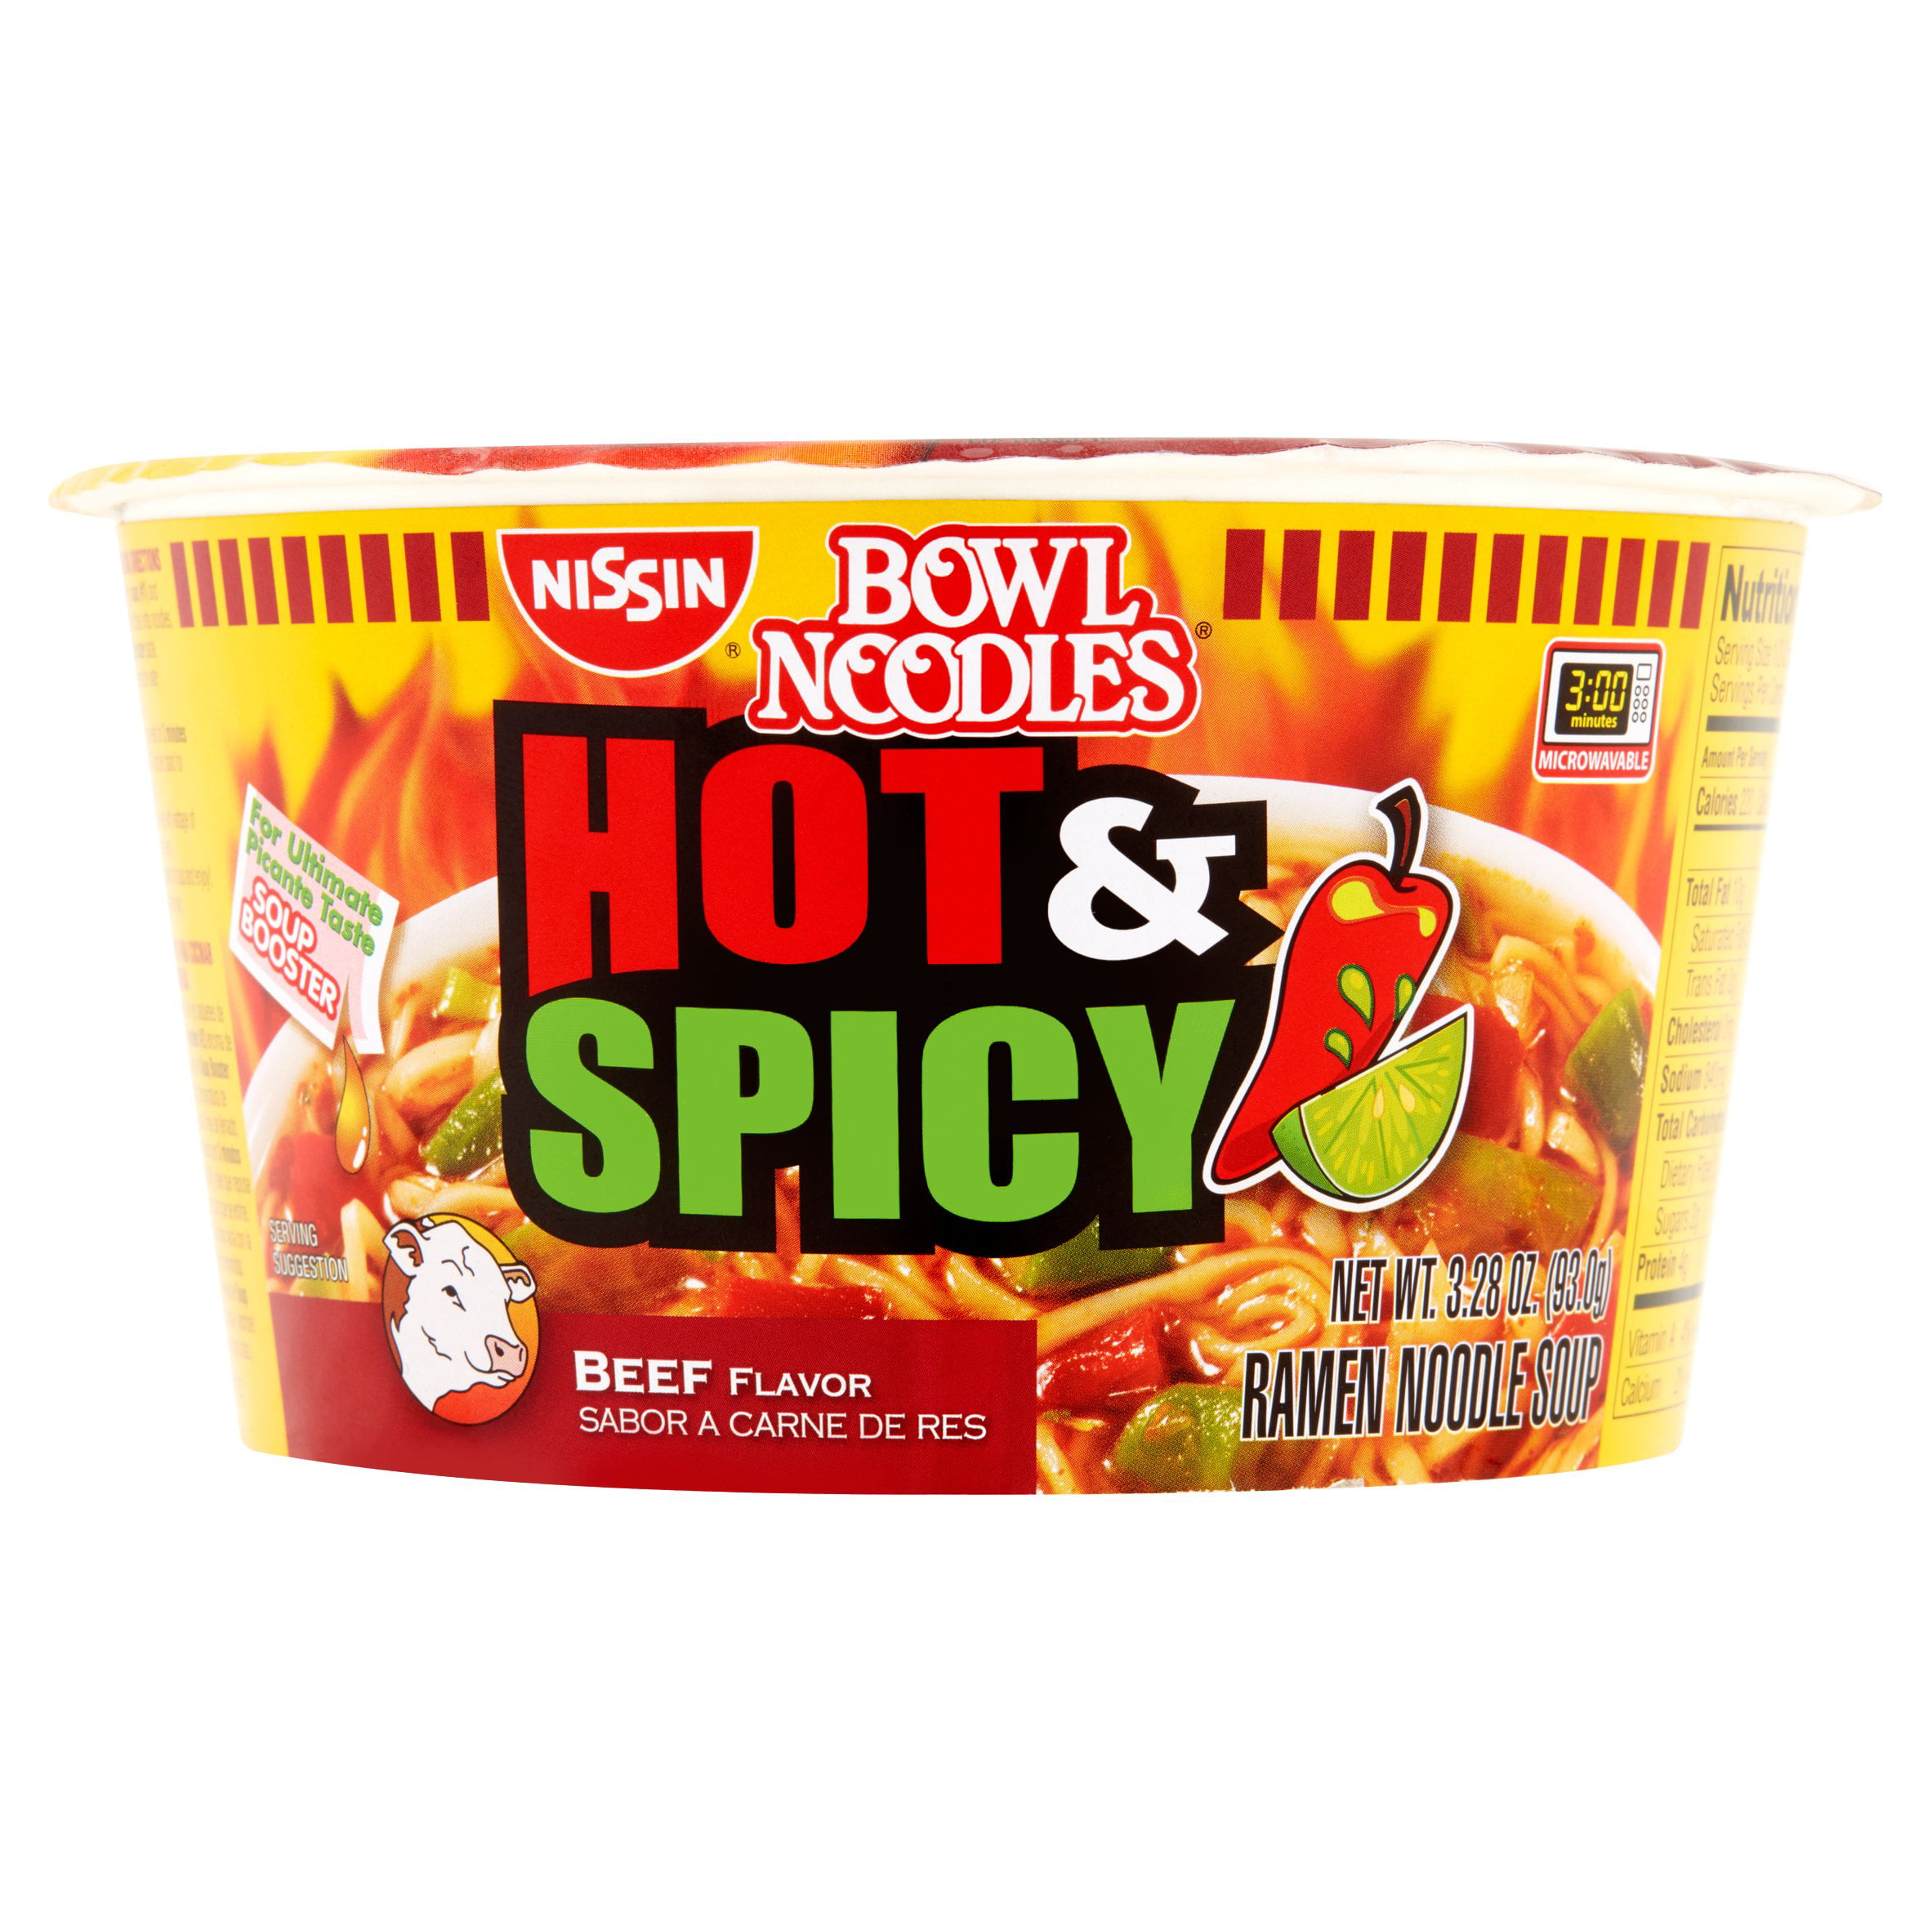 nissin hot and spicy review